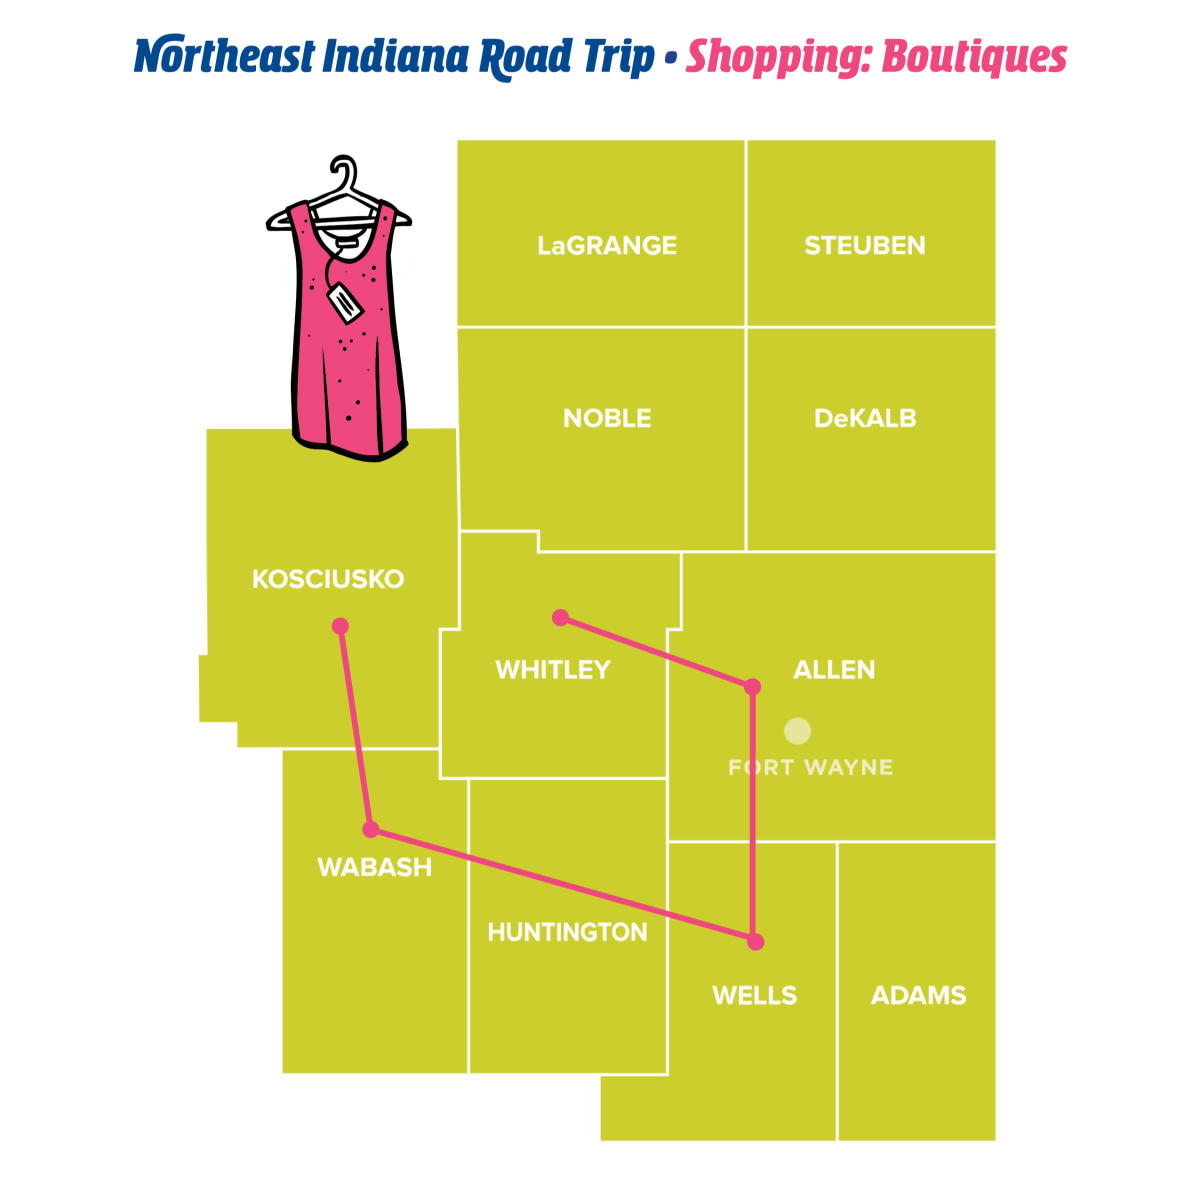 Boutiques - Northeast Indiana Road Trips